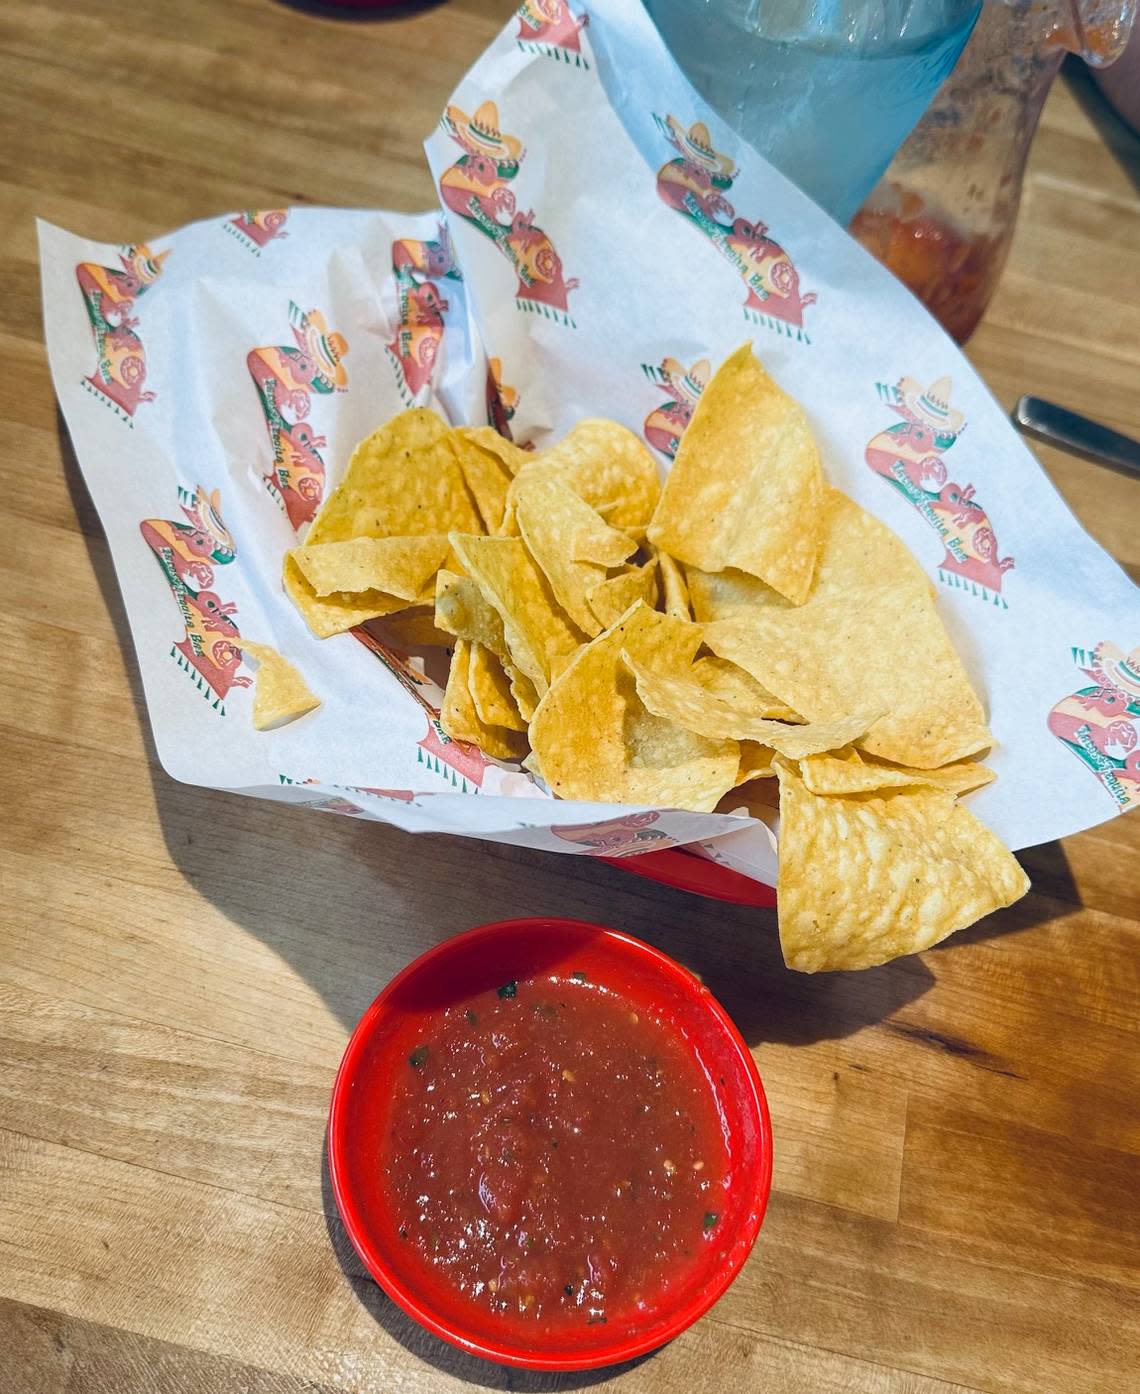 The chips and salsa at Pedro’s is delicious and unique.